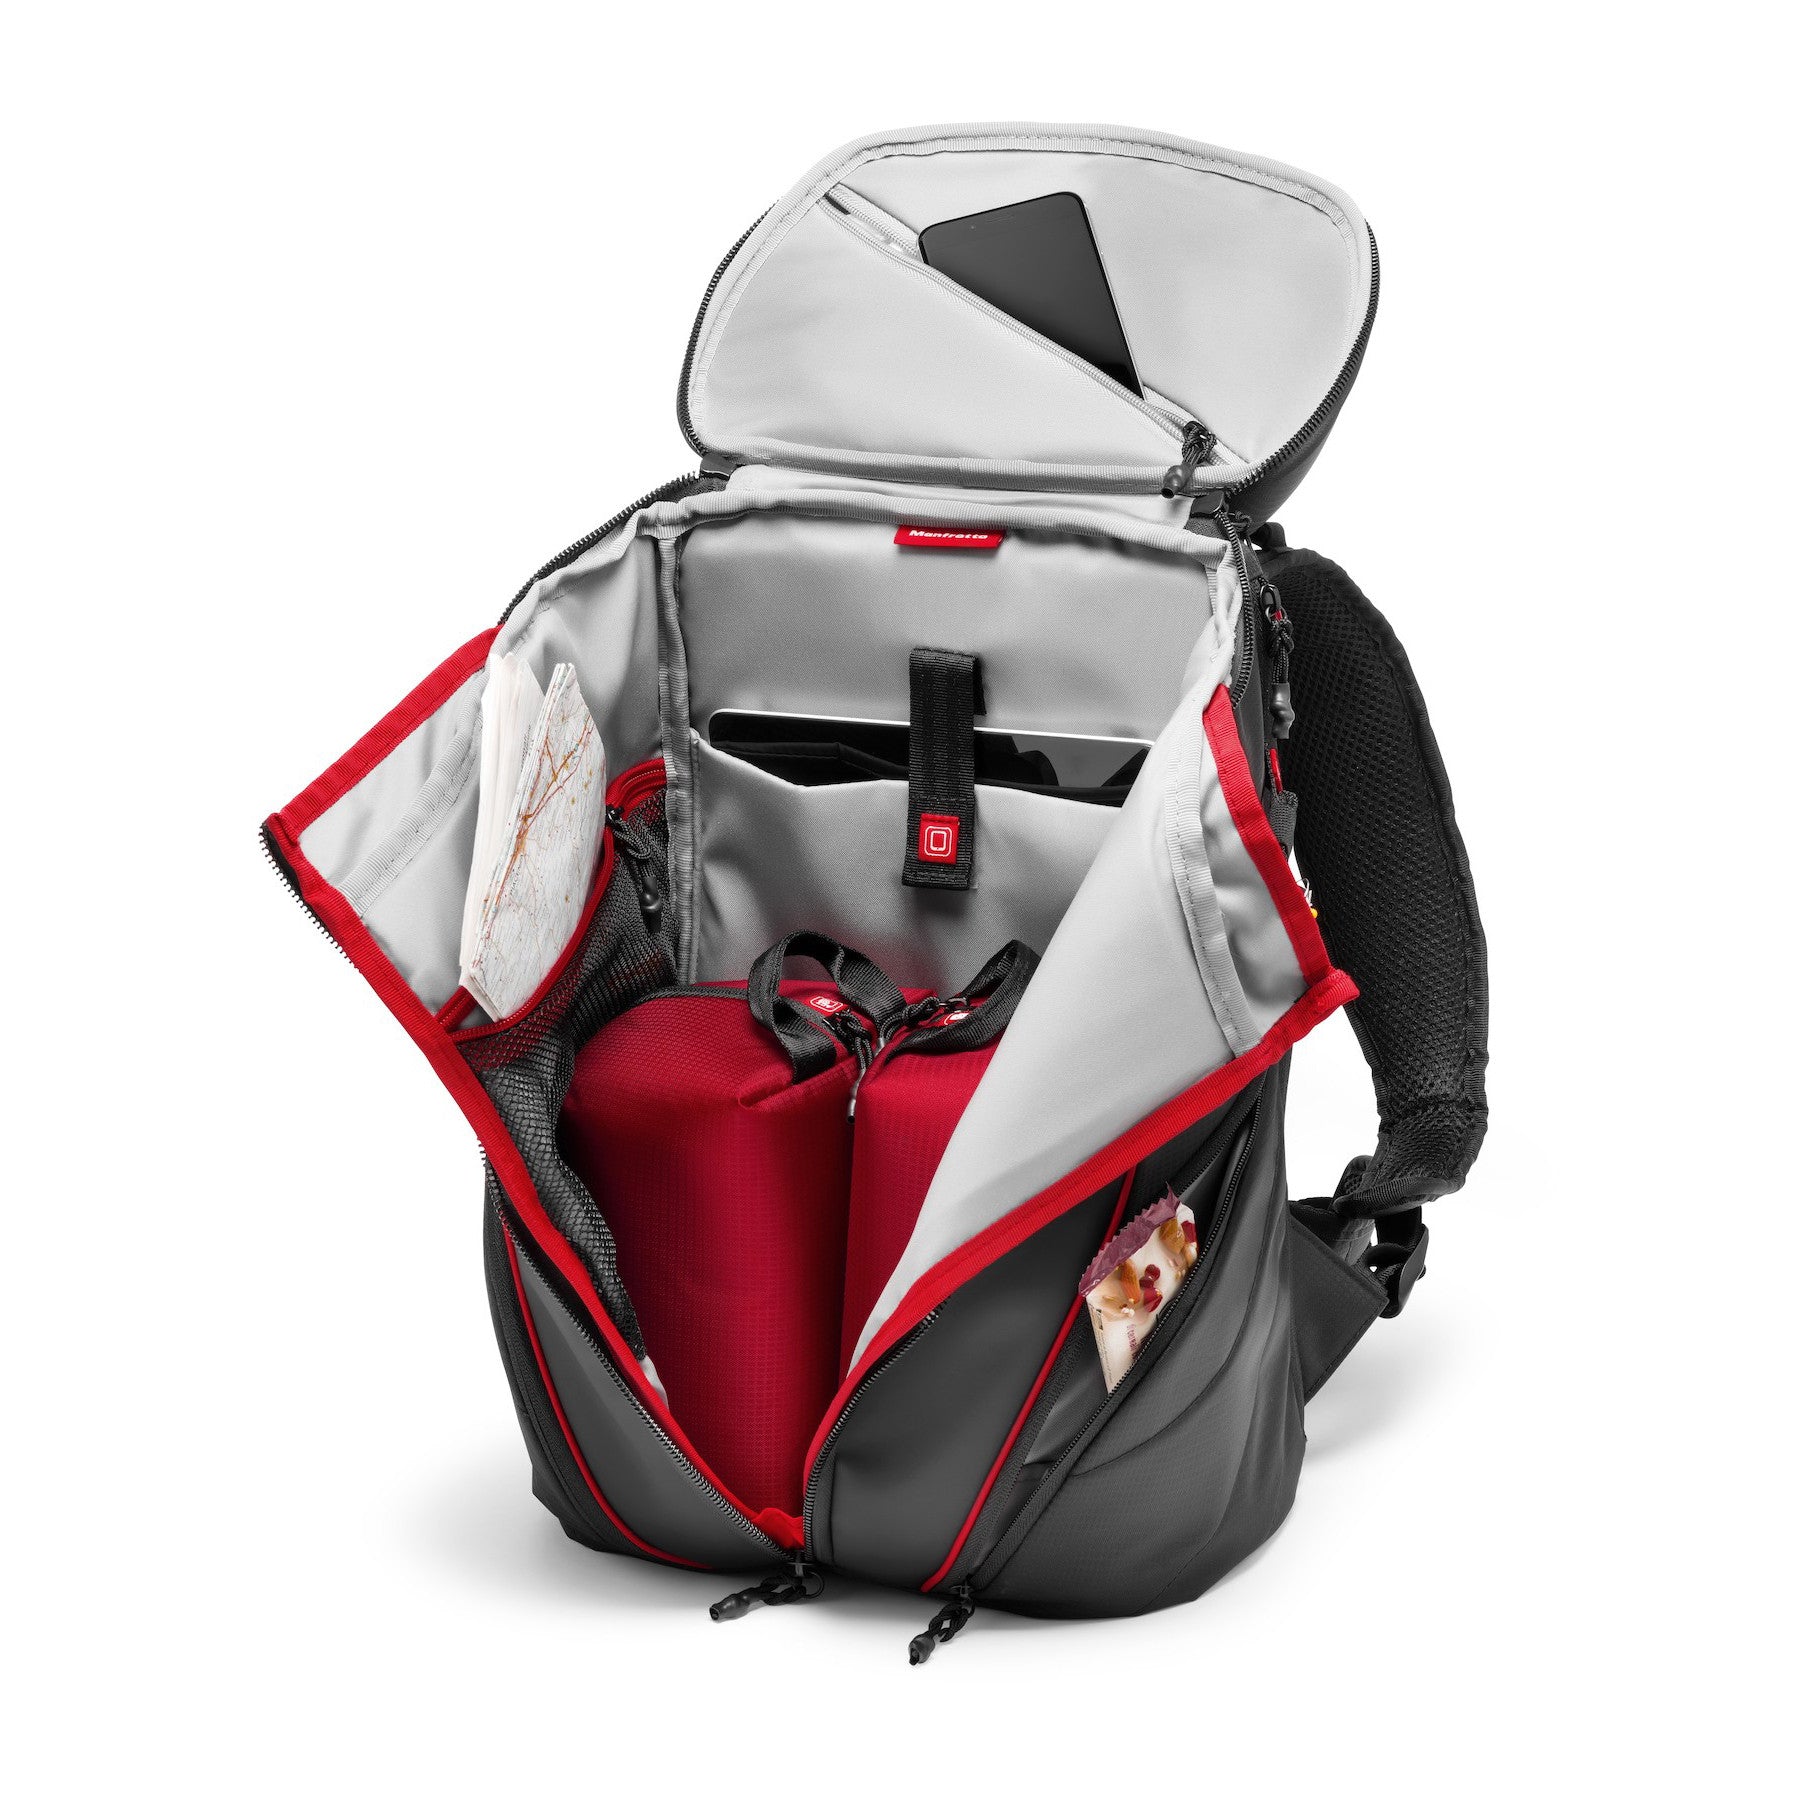 Manfrotto Off Road Stunt Backpack (Black), bags backpacks, Manfrotto - Pictureline  - 7